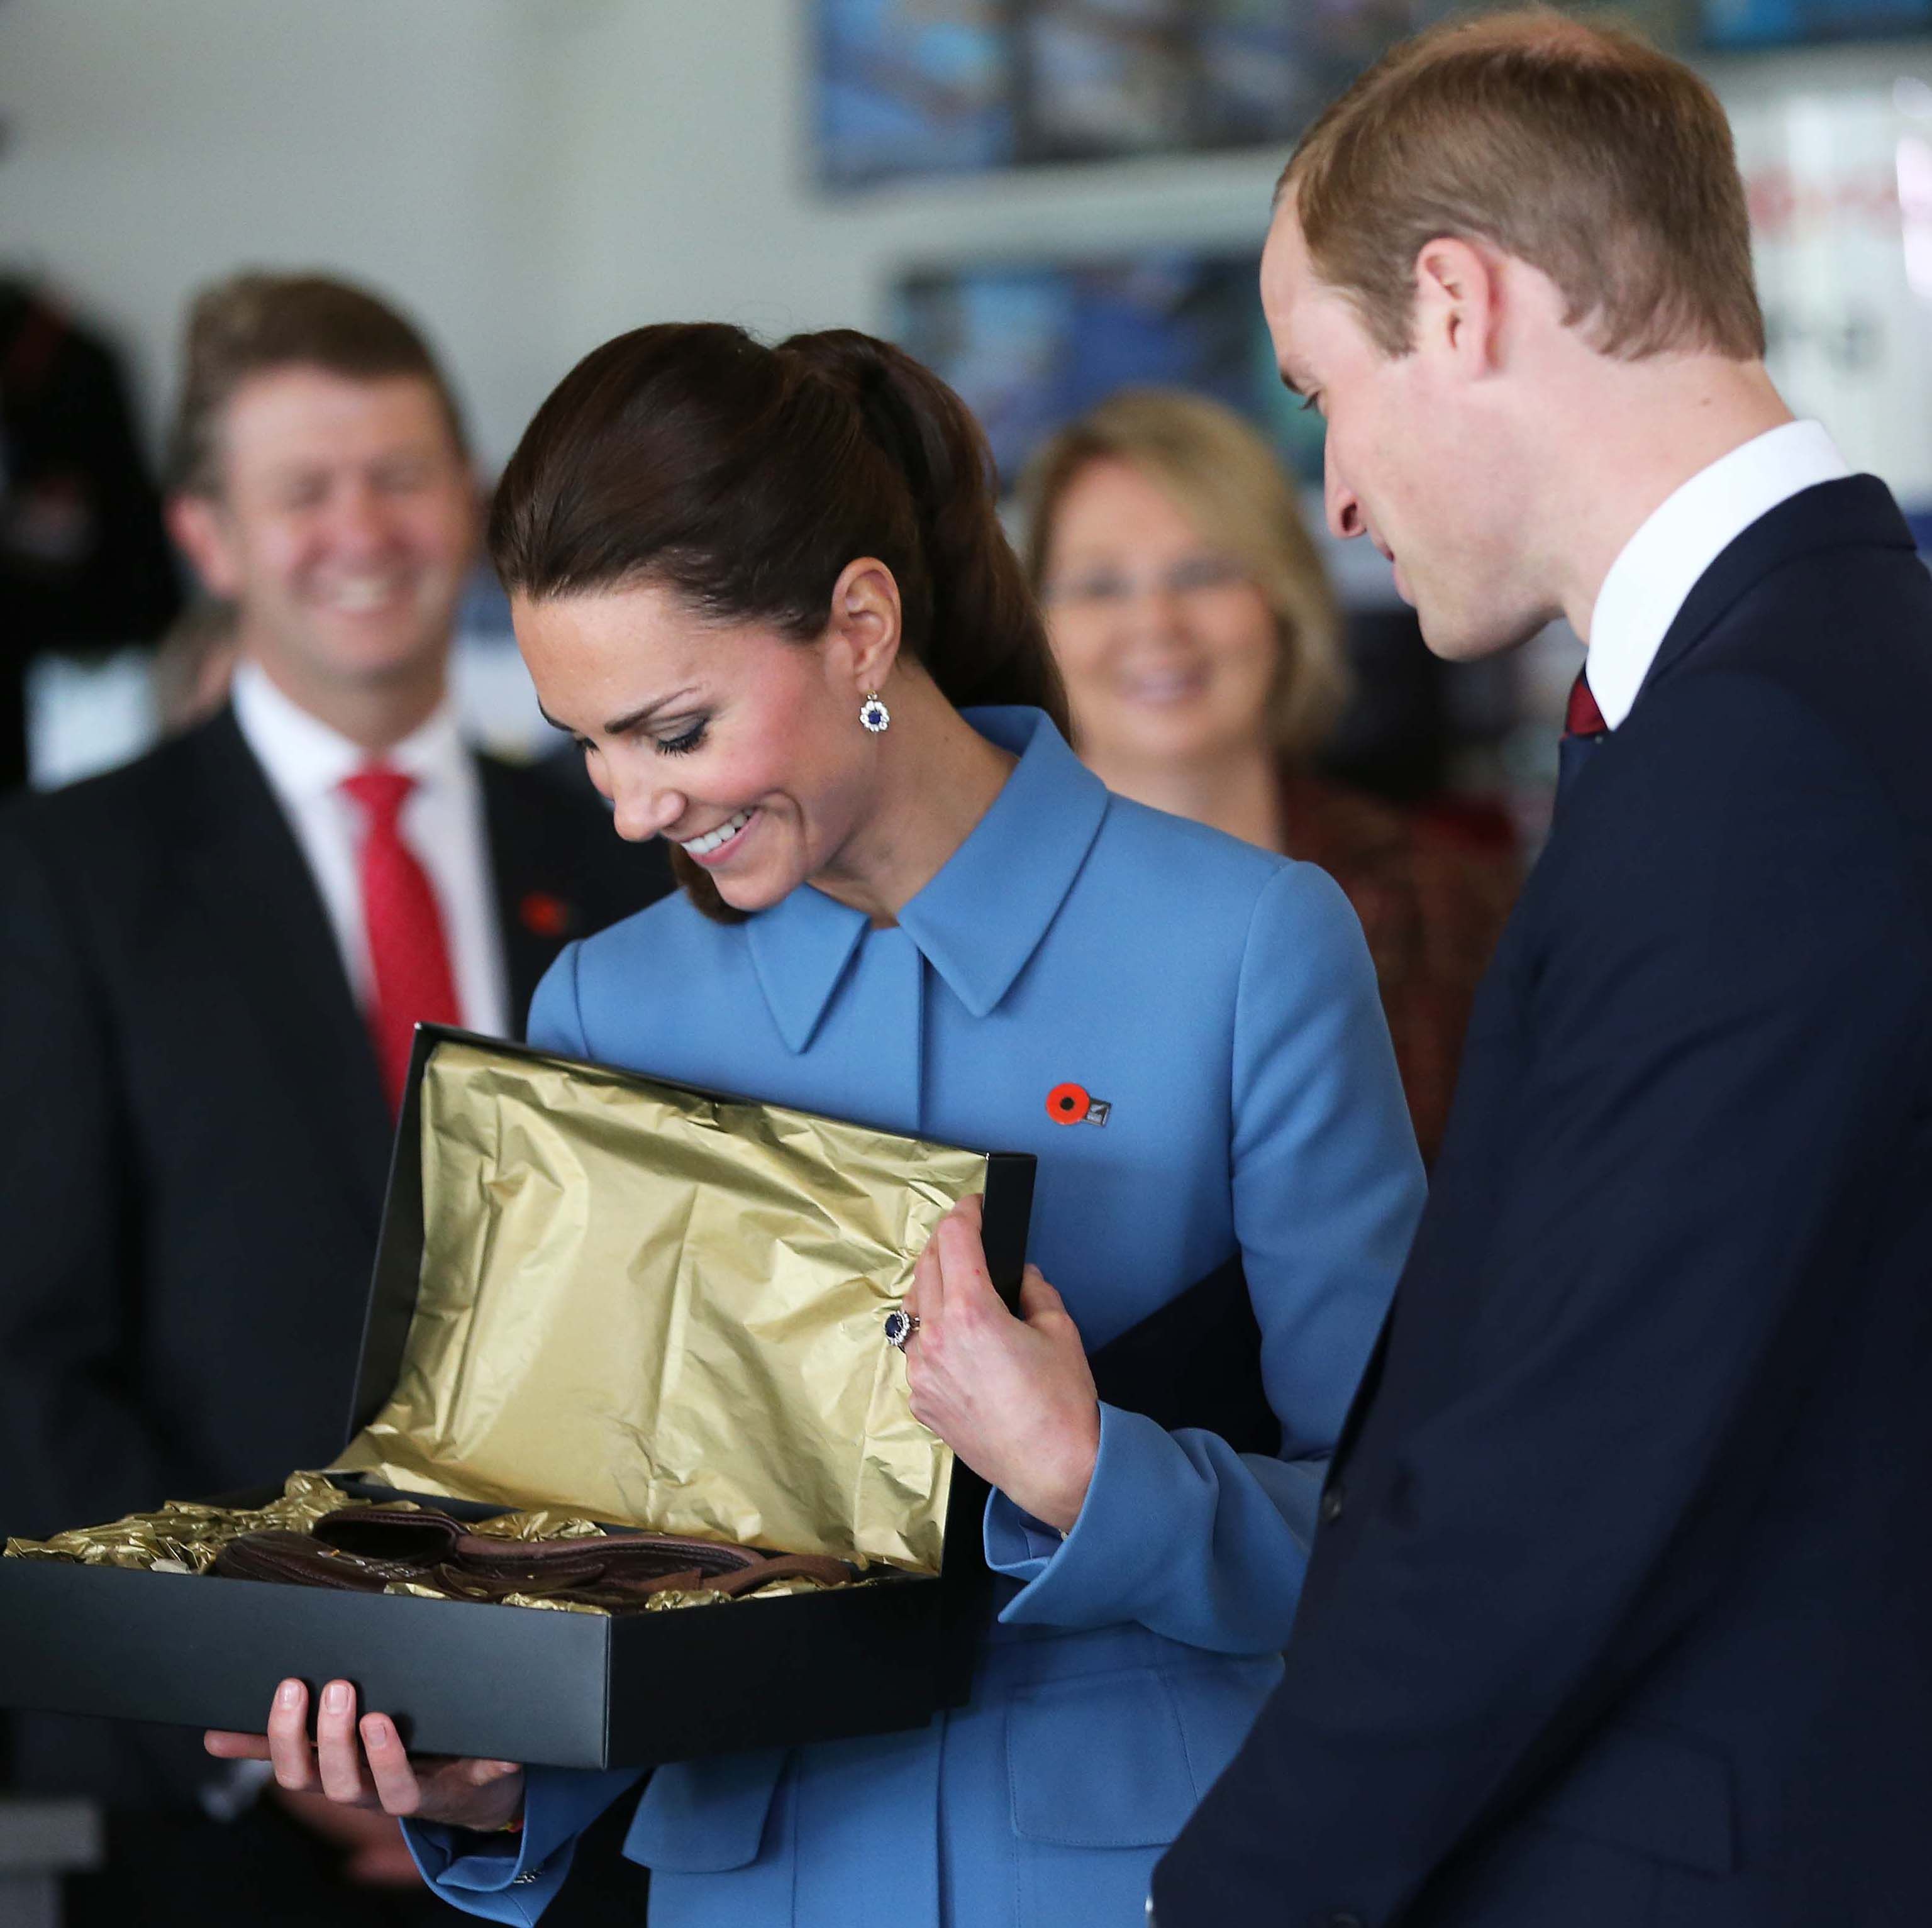 A Kate Middleton Gift Guide: Shop Presents Fit for a Duchess